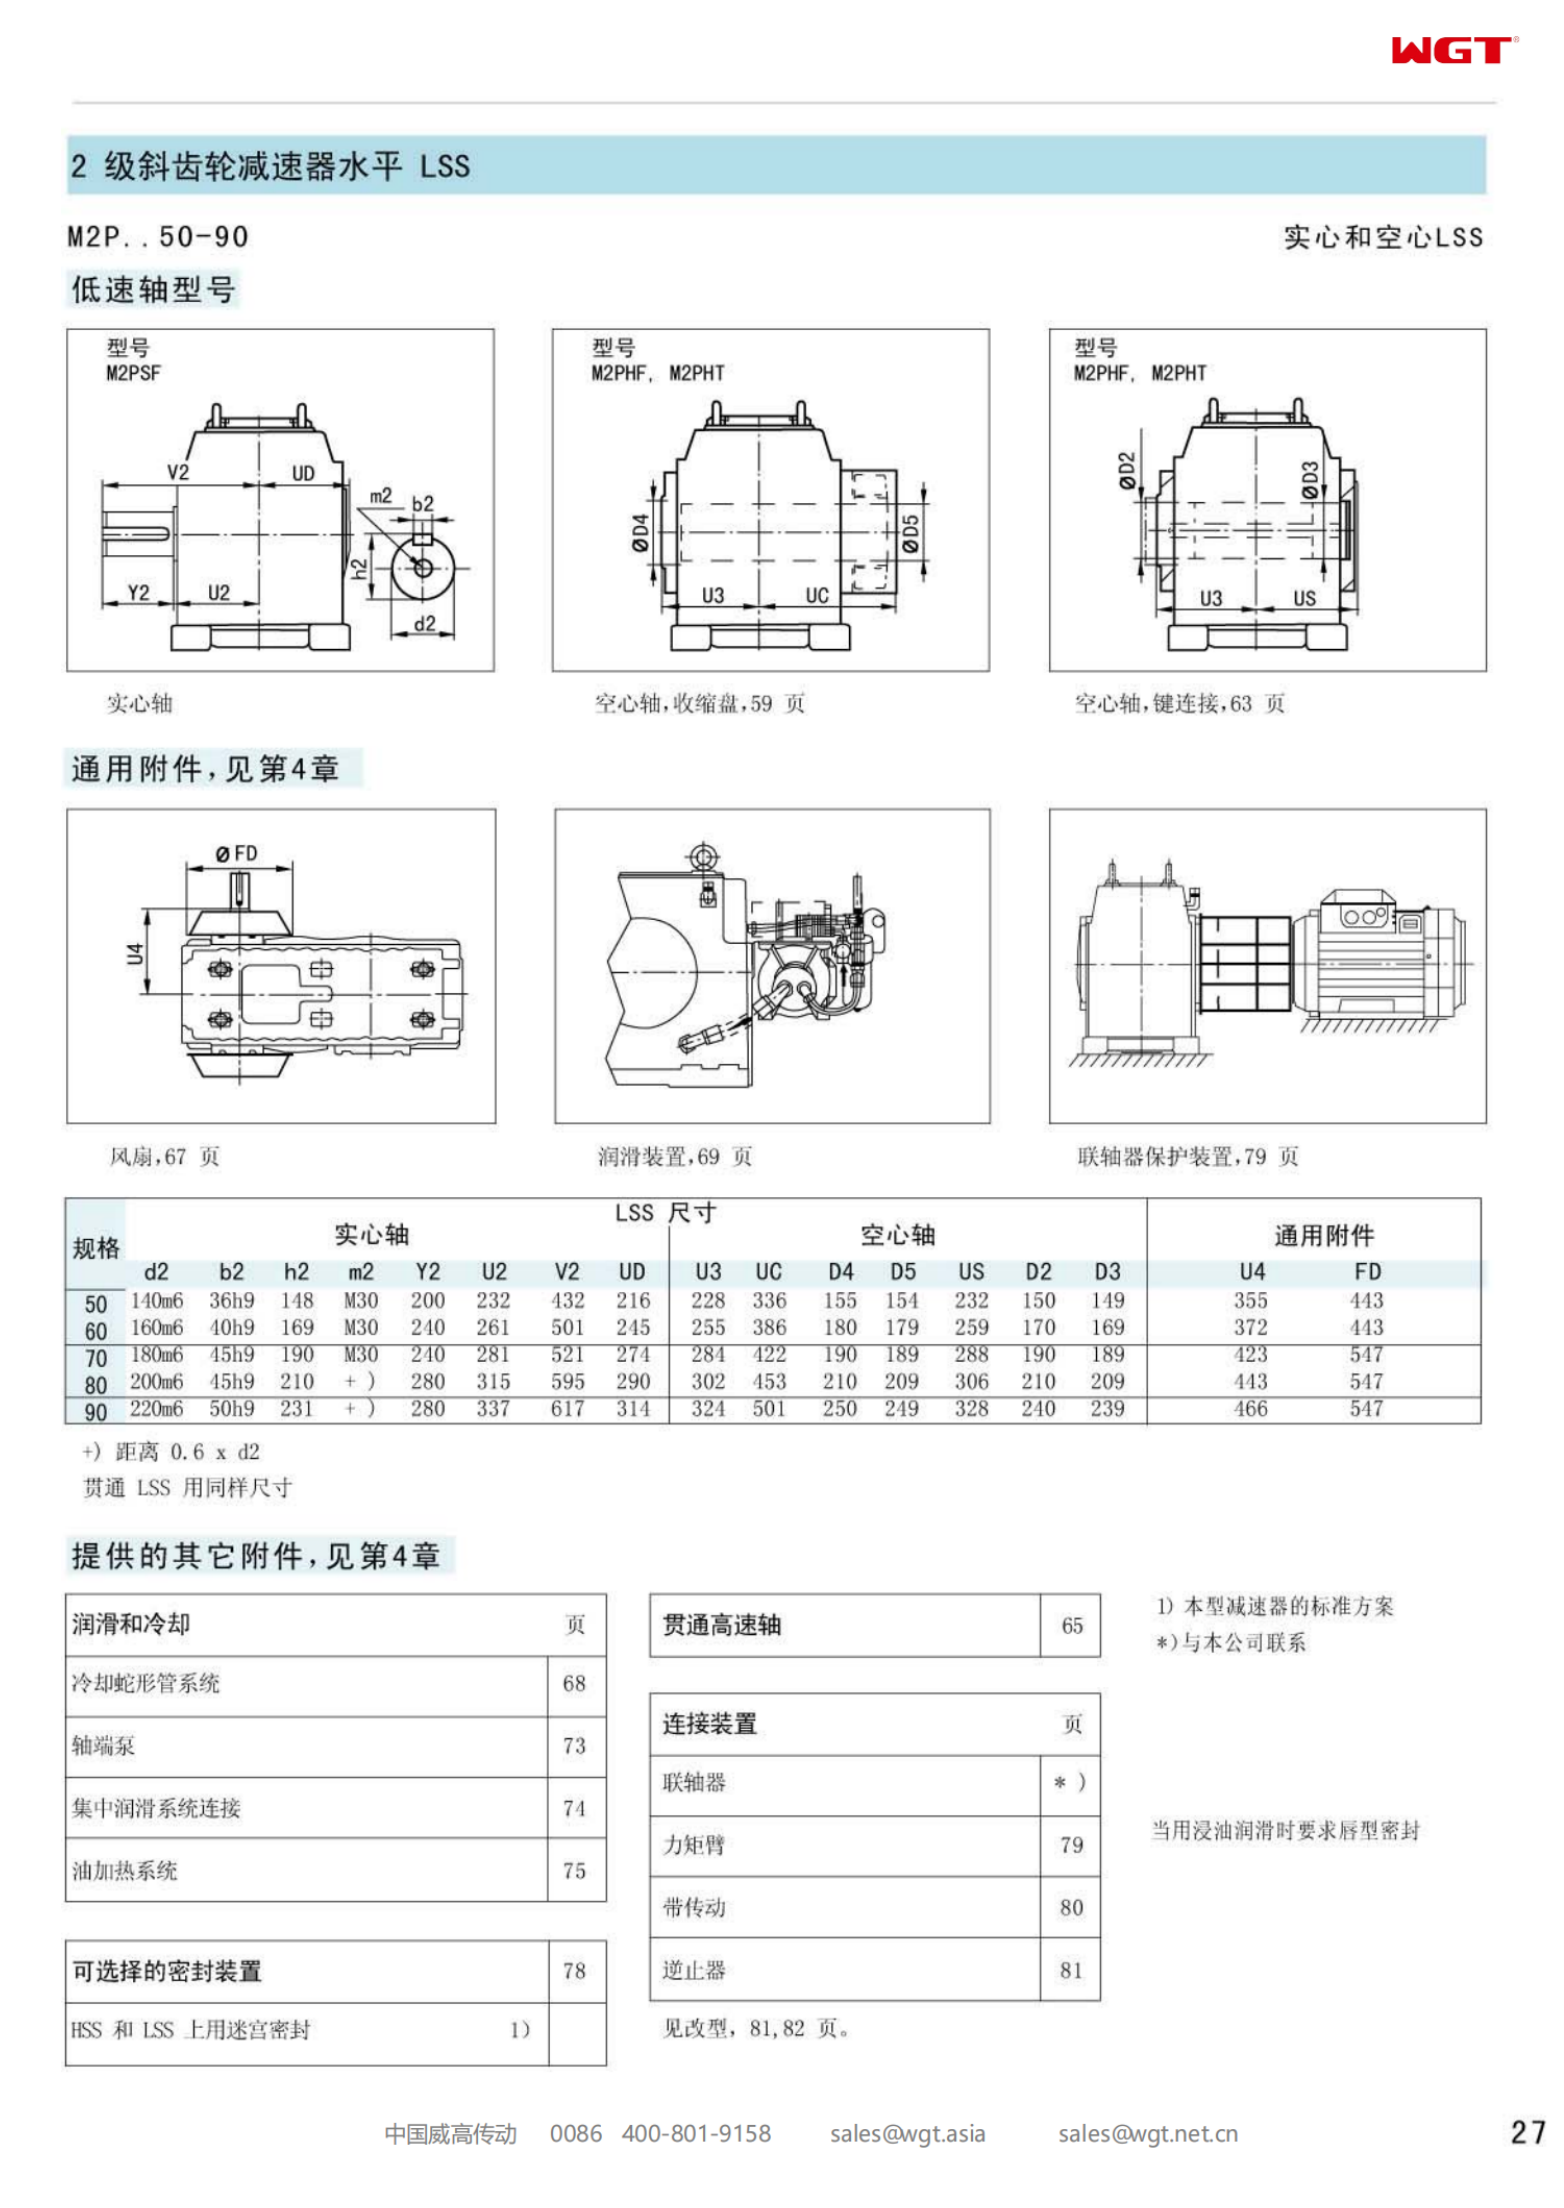 M2PHF60 Replace_SEW_M_Series Gearbox